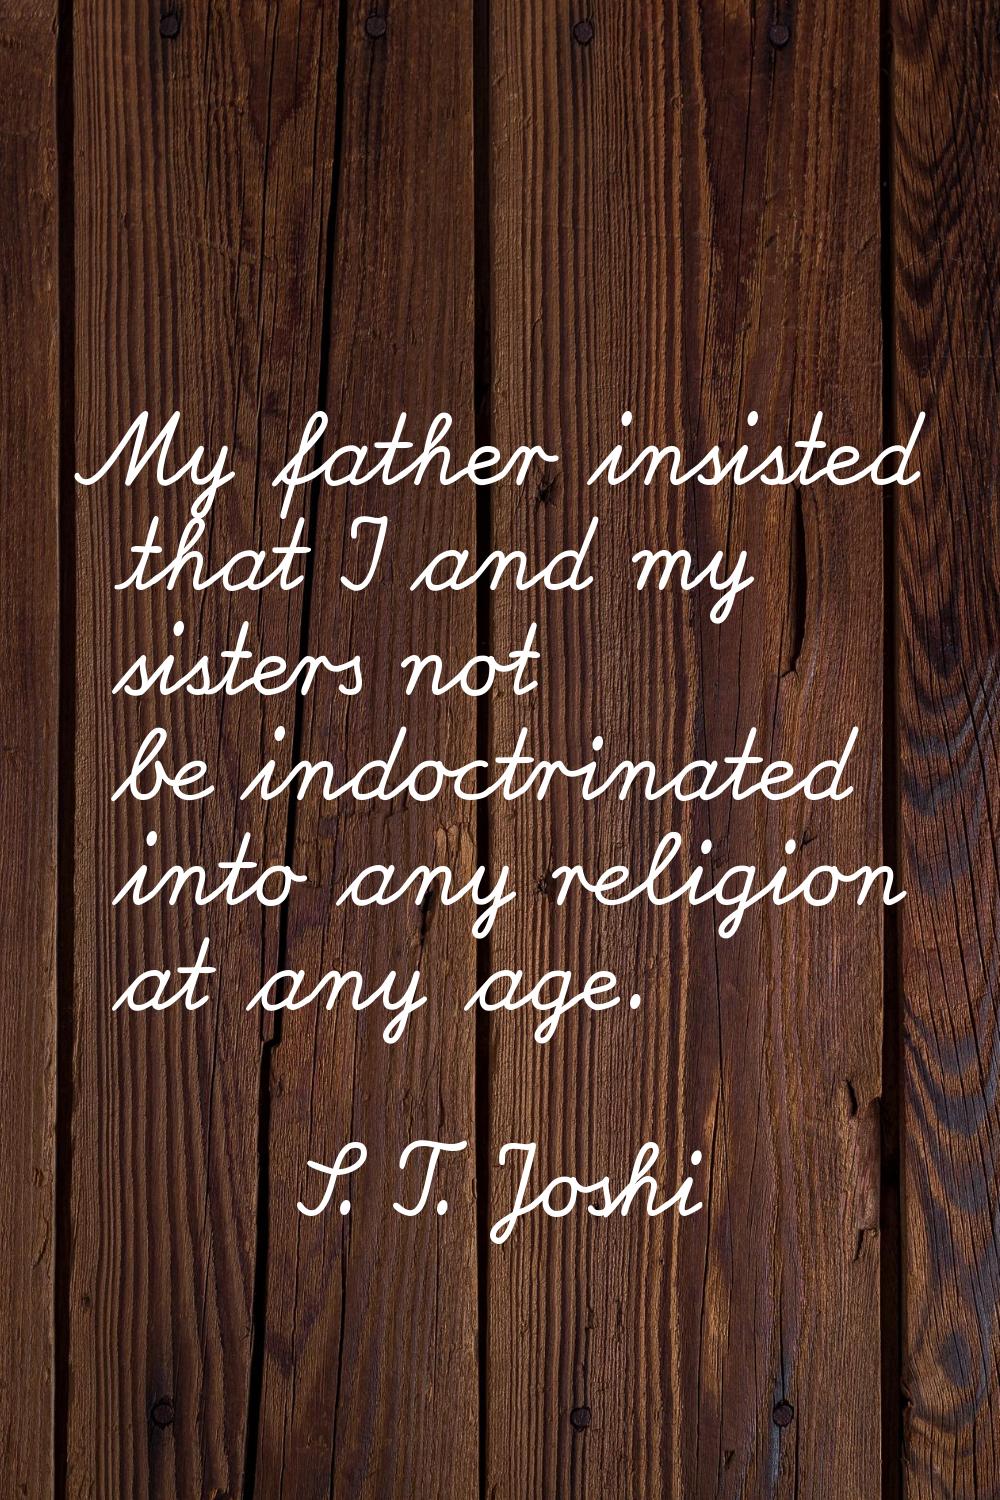 My father insisted that I and my sisters not be indoctrinated into any religion at any age.